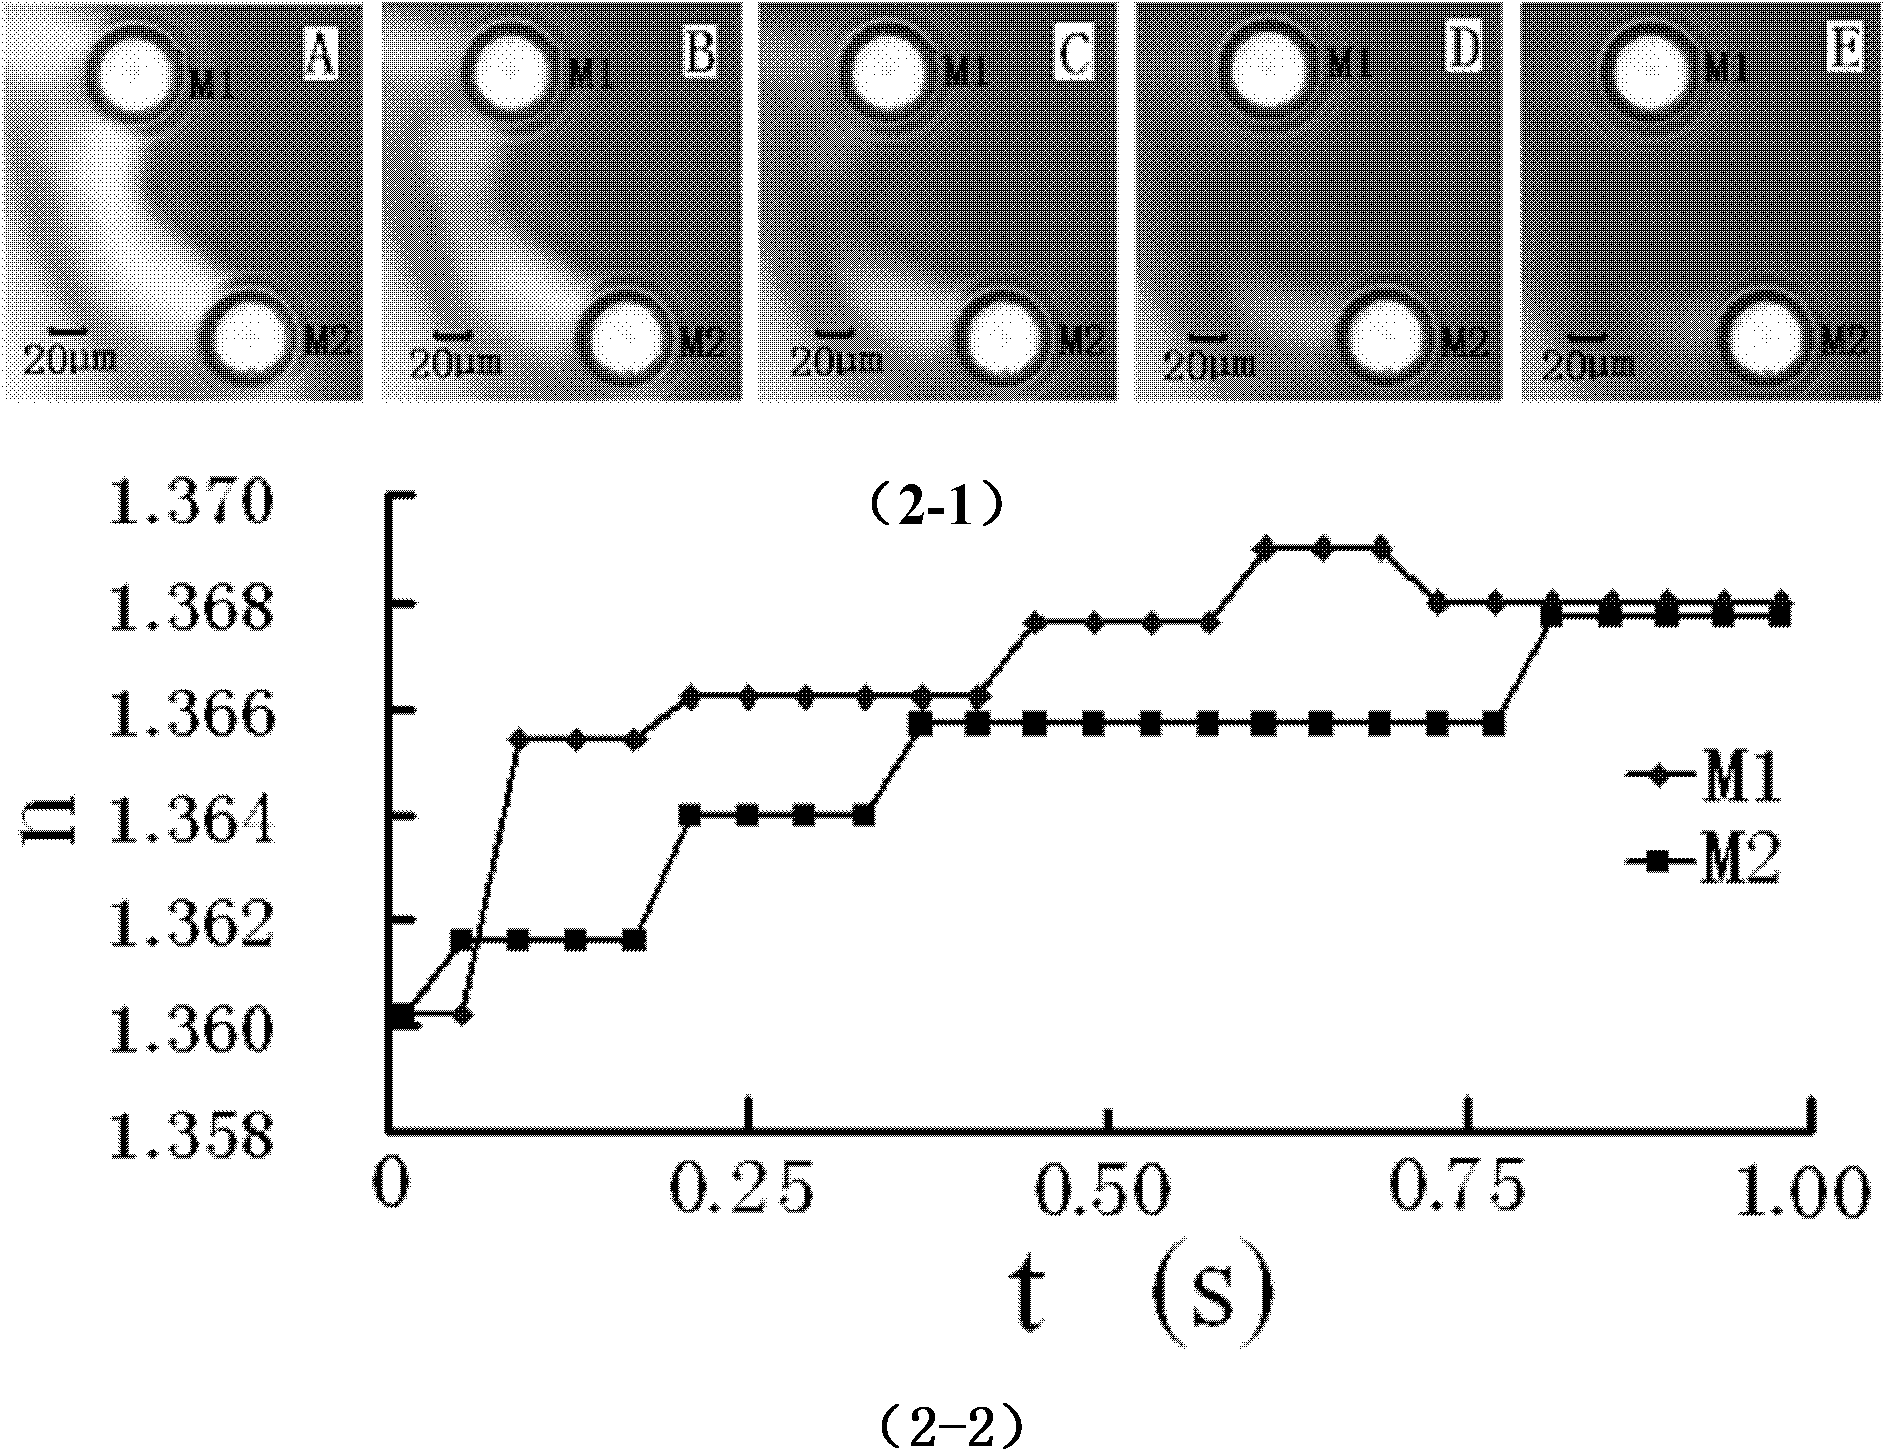 Method for measuring refractive index of microsphere or medium and application thereof